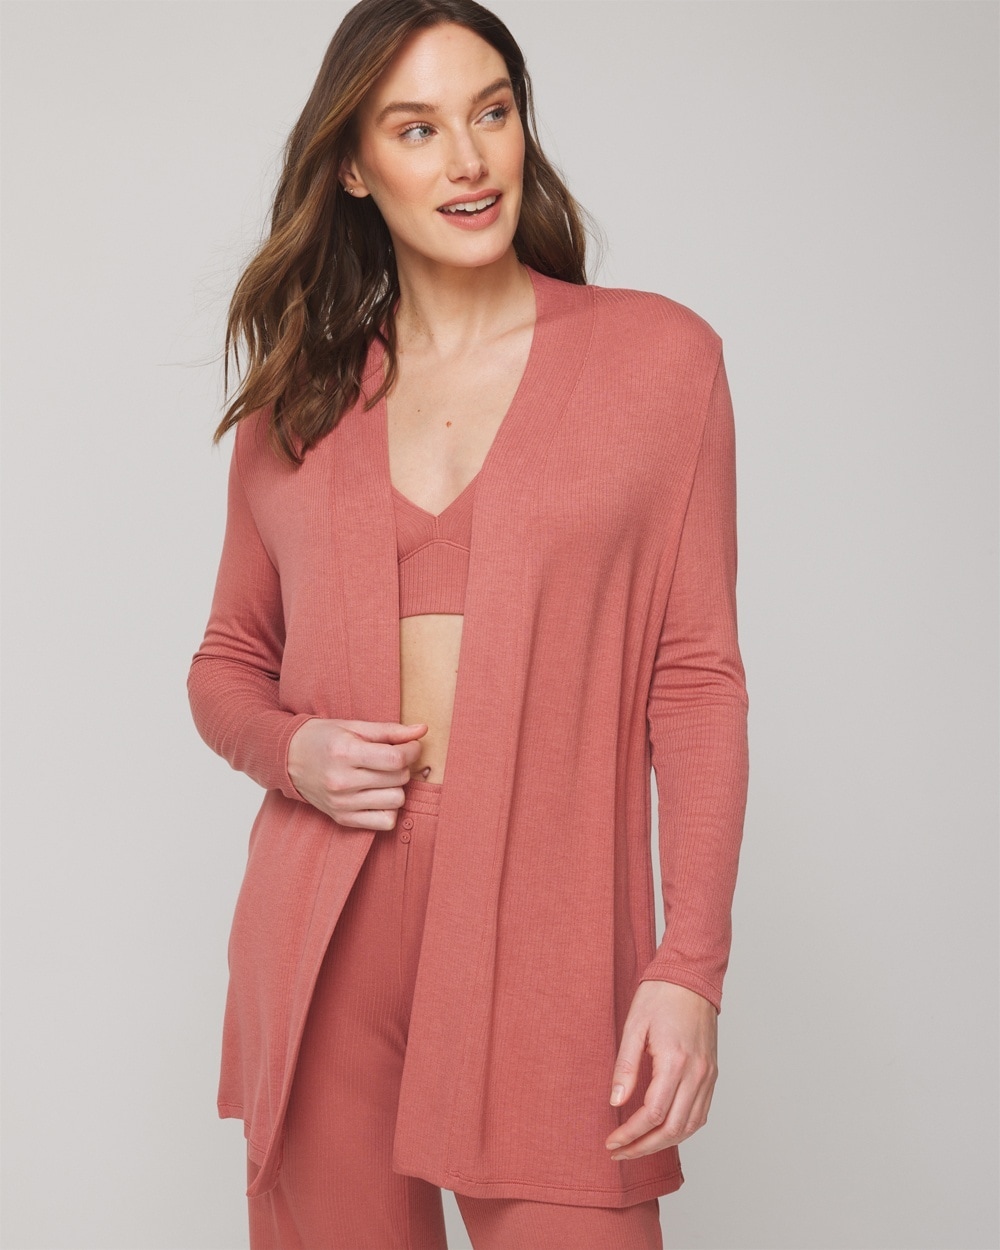 Soma Women's Lightweight Ribbed Knit Wrap In Pink Size Small/medium |  In Clay Rose